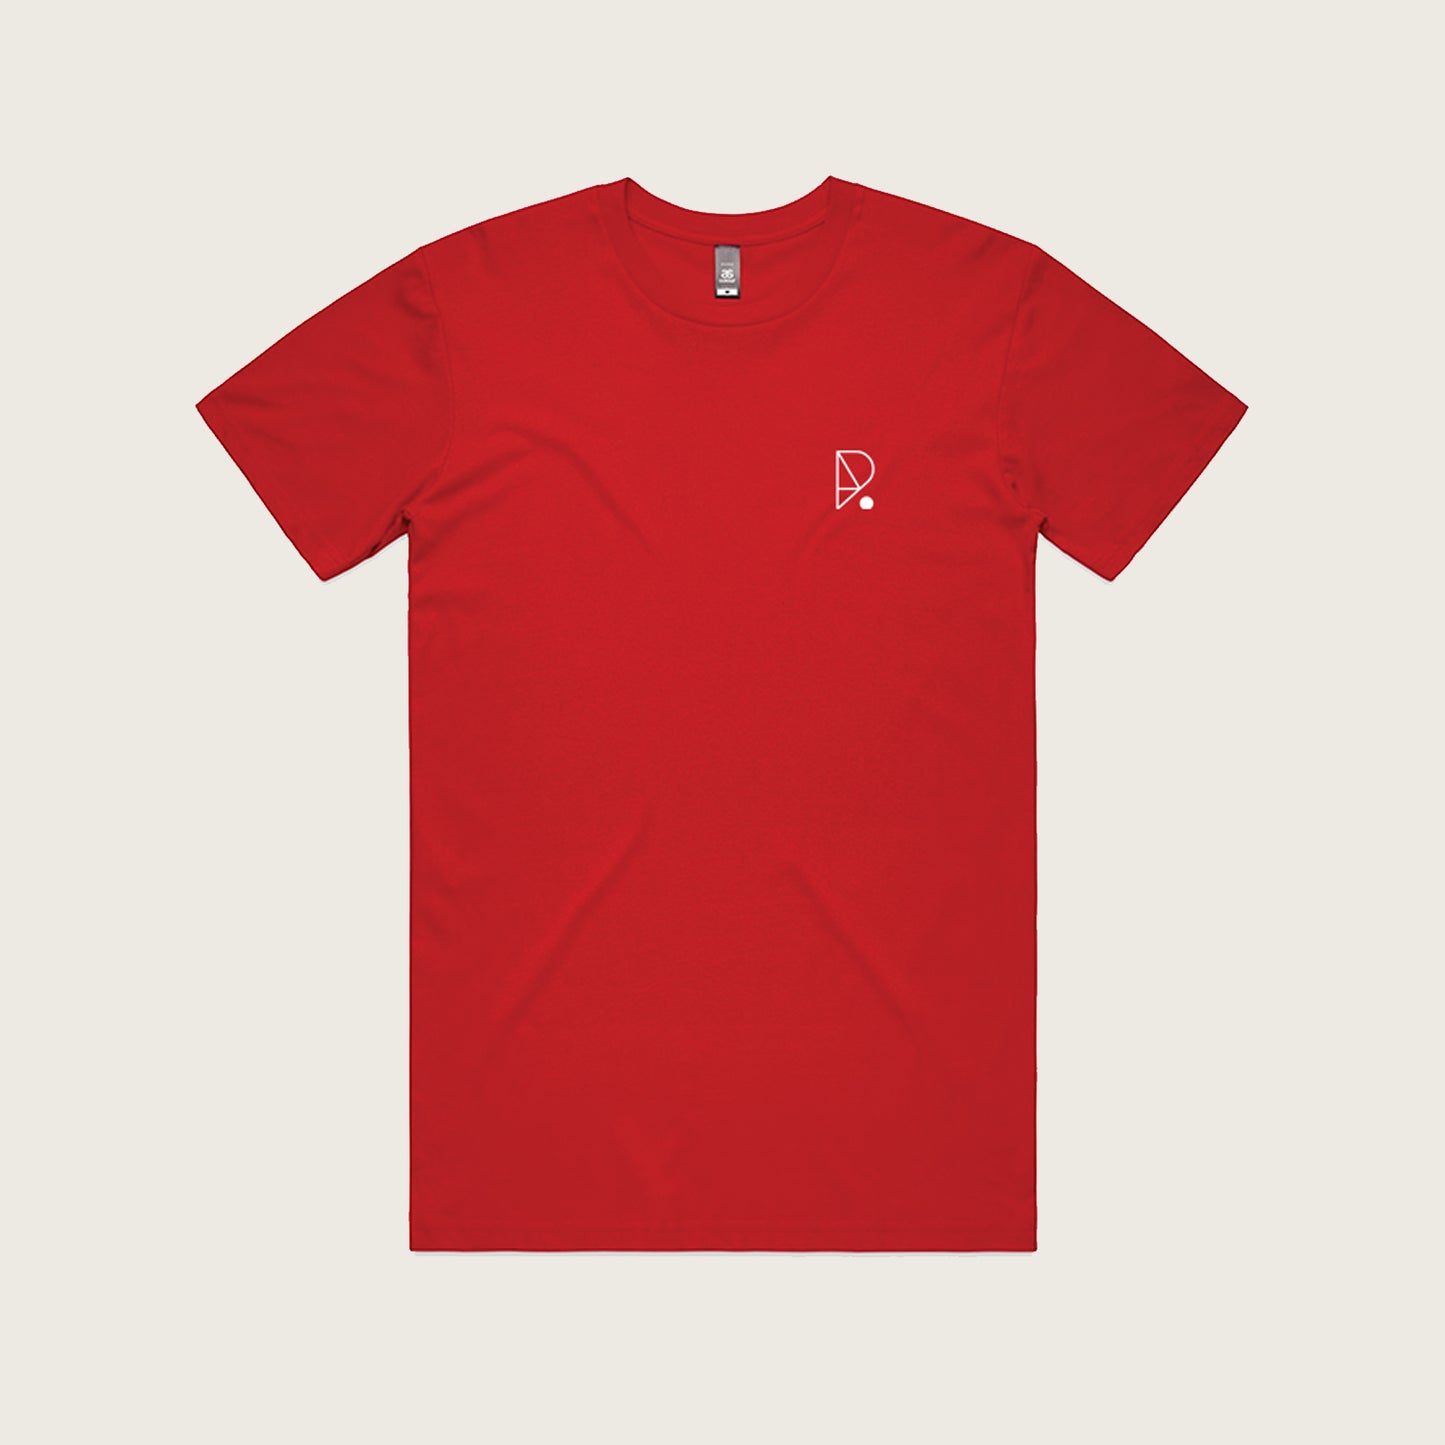 Redpoint climbing mens teeshirt red front